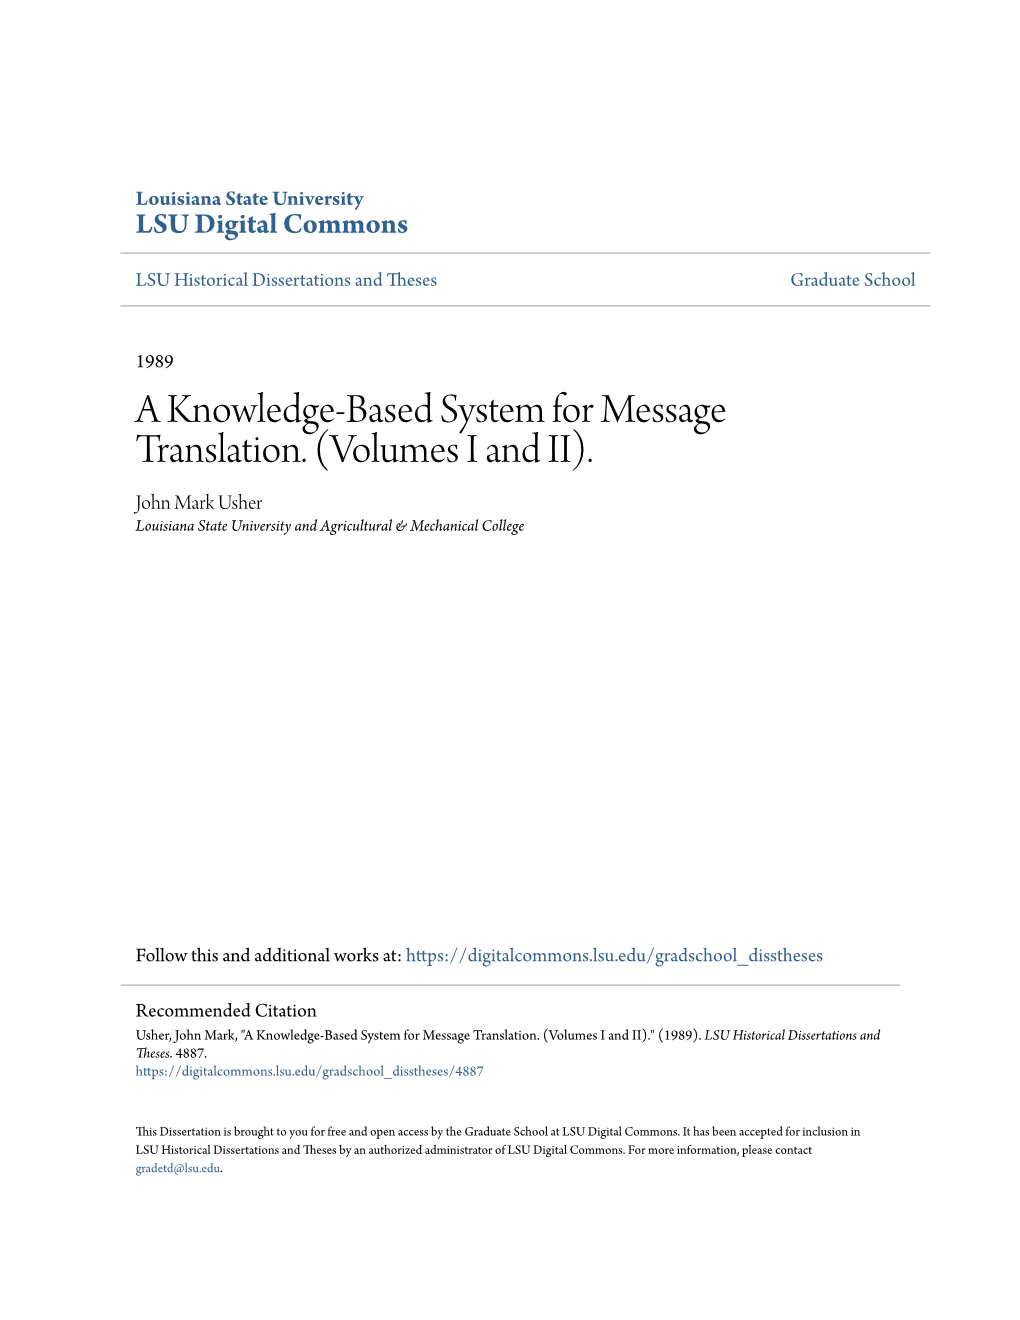 A Knowledge-Based System for Message Translation. (Volumes I and II)